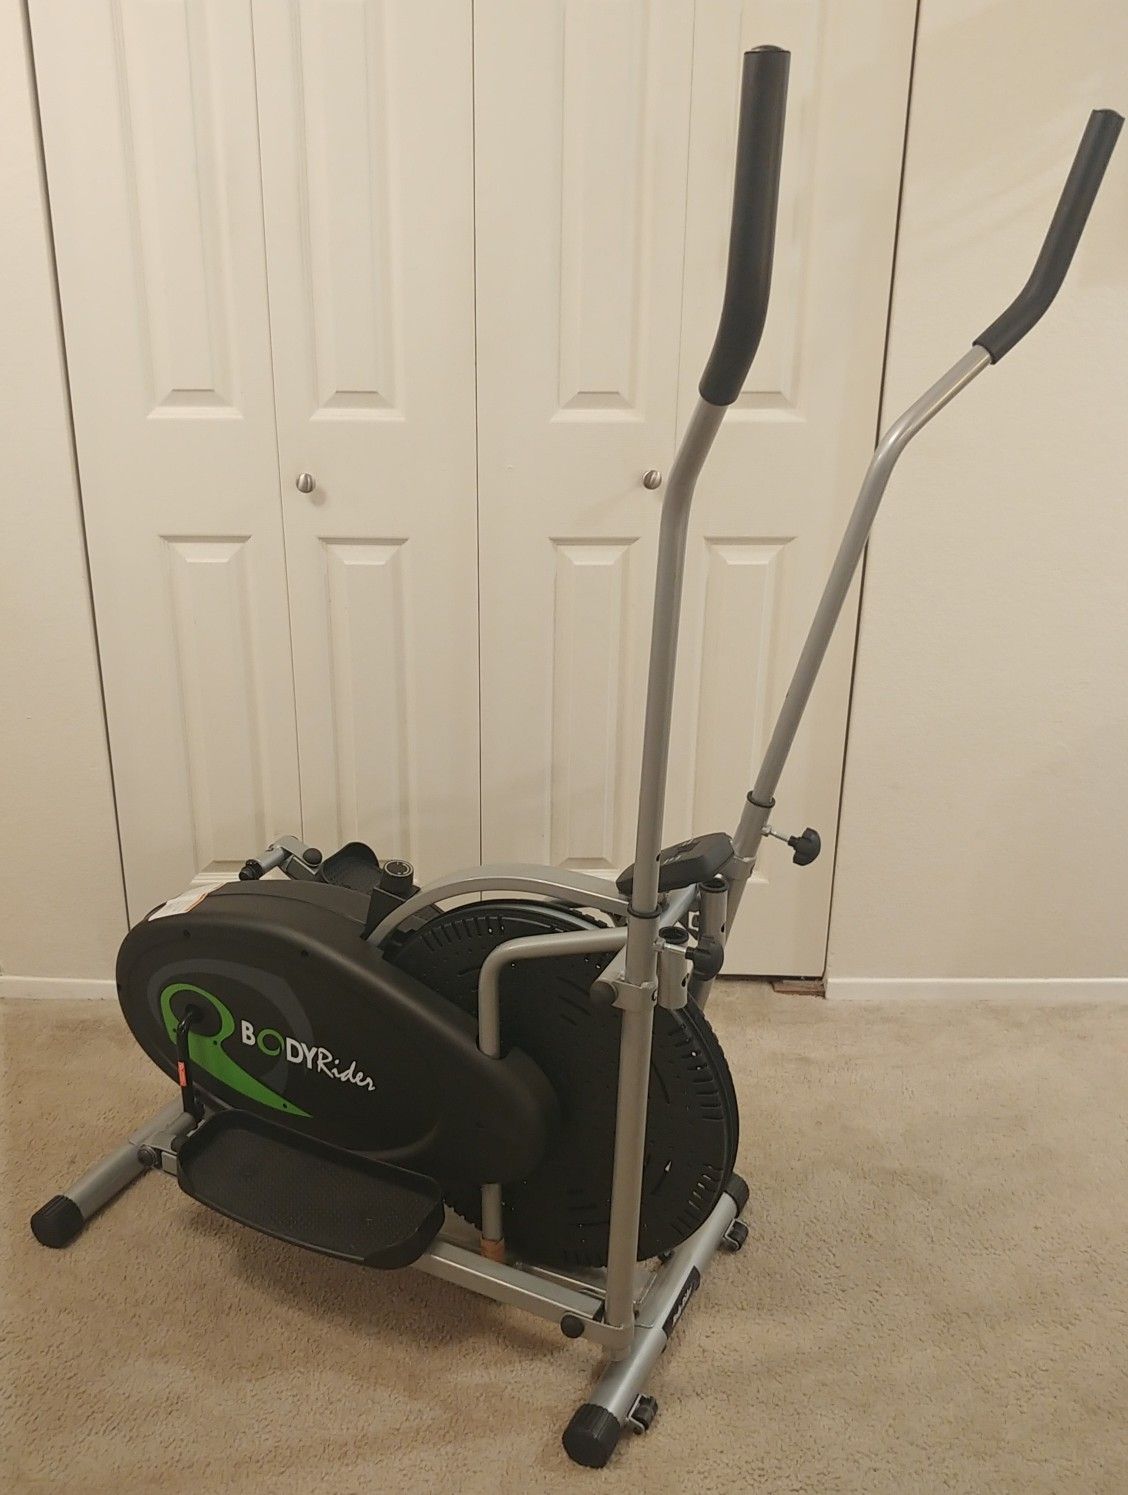 NEW Elliptical Workout Machine - $120 Or Best Offer!